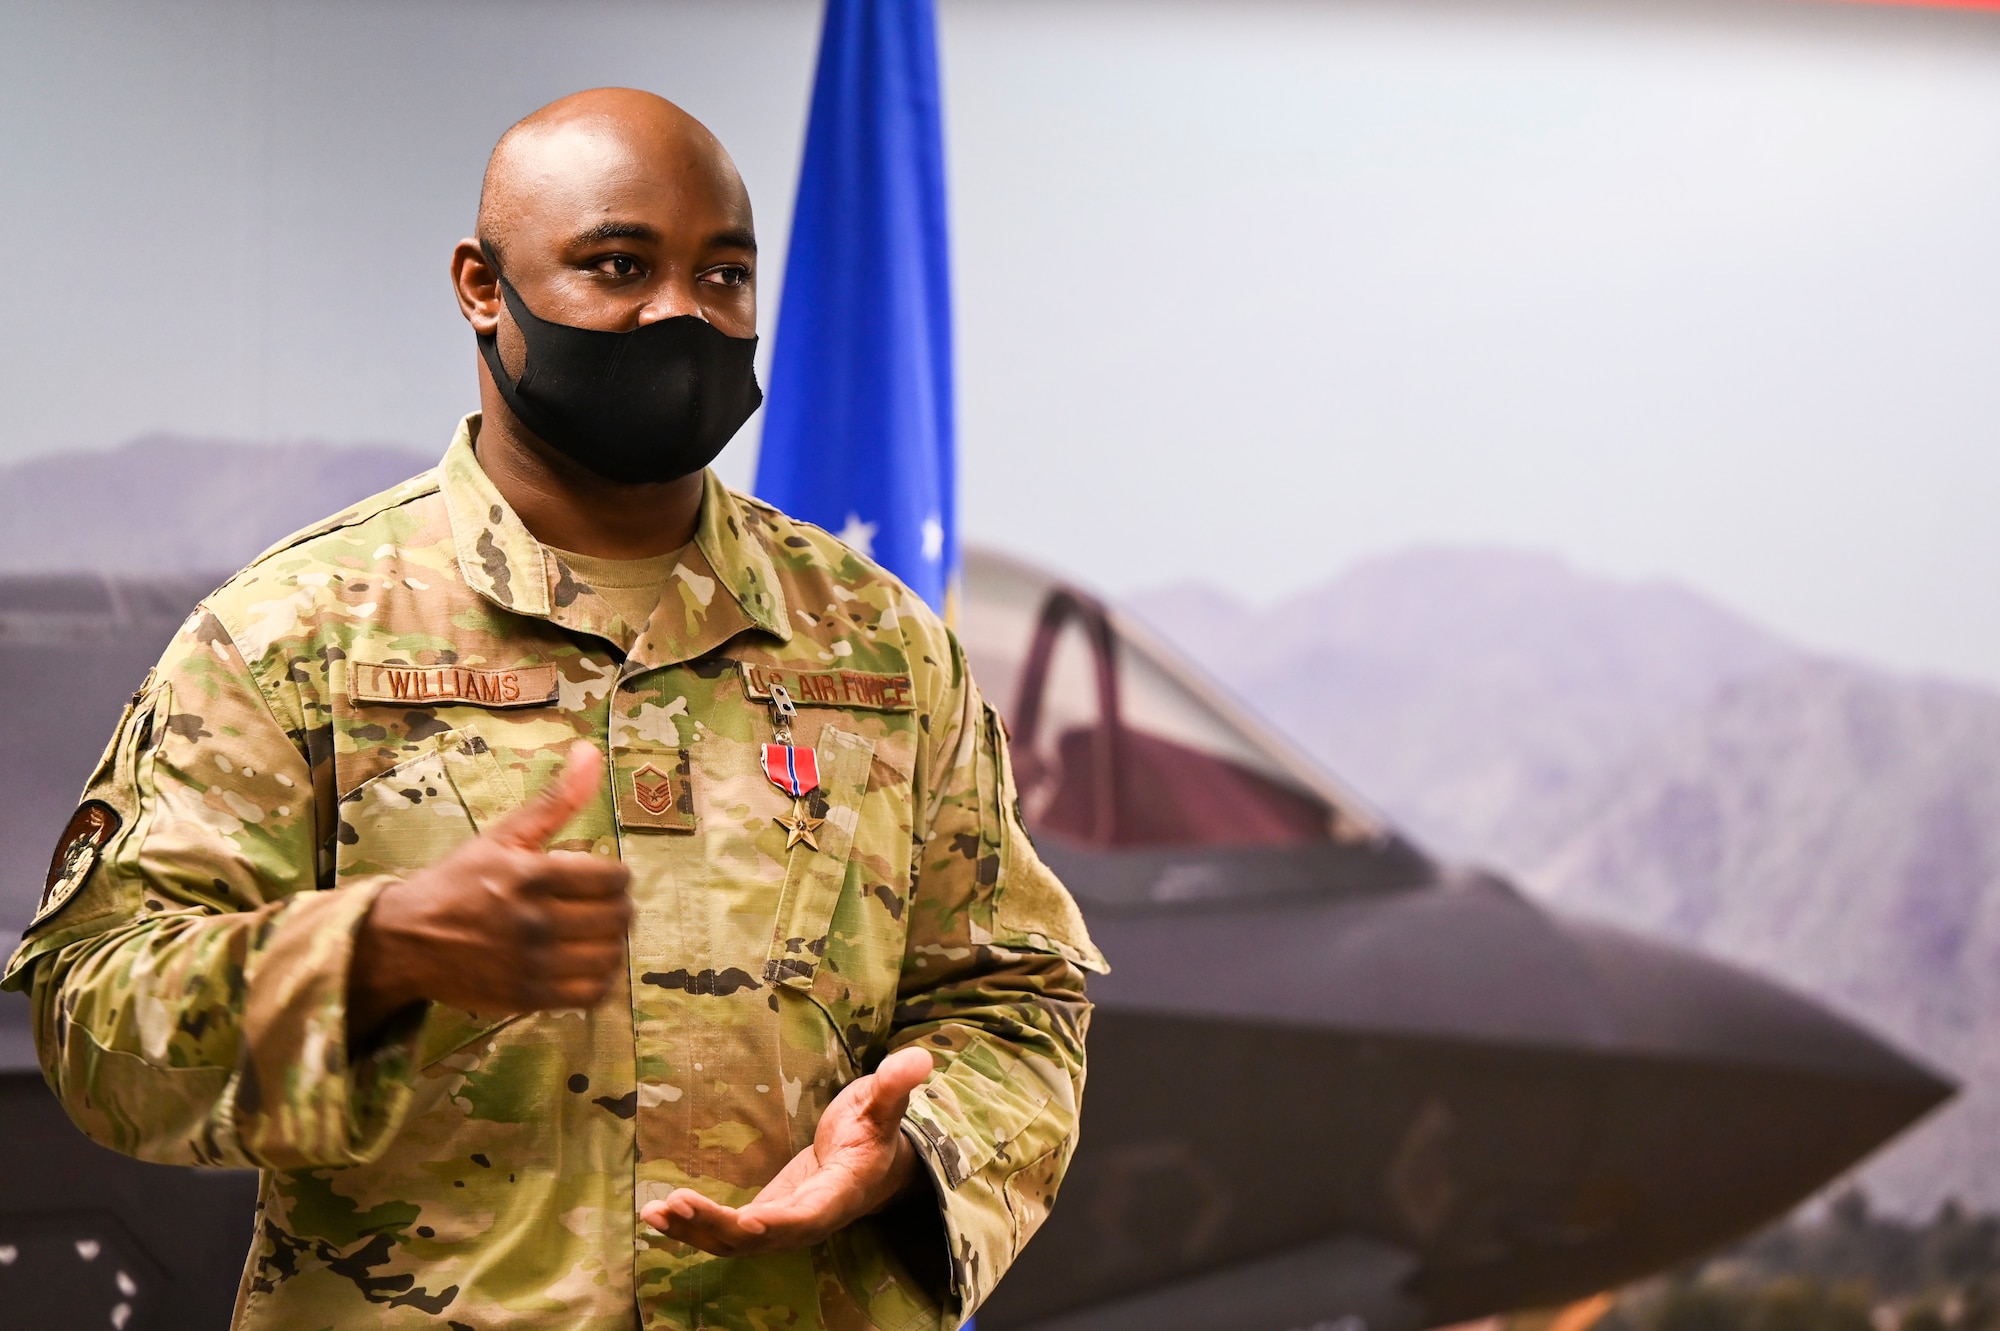 U.S. Air Force Master Sgt. Thomas Williams, 62nd Aircraft Maintenance Unit weapons loading non-commissioned officer in charge, receives the Bronze Star Medal for meritorious achievement in a deployed location Sept. 1, 2021, at Luke Air Force Base, Arizona.